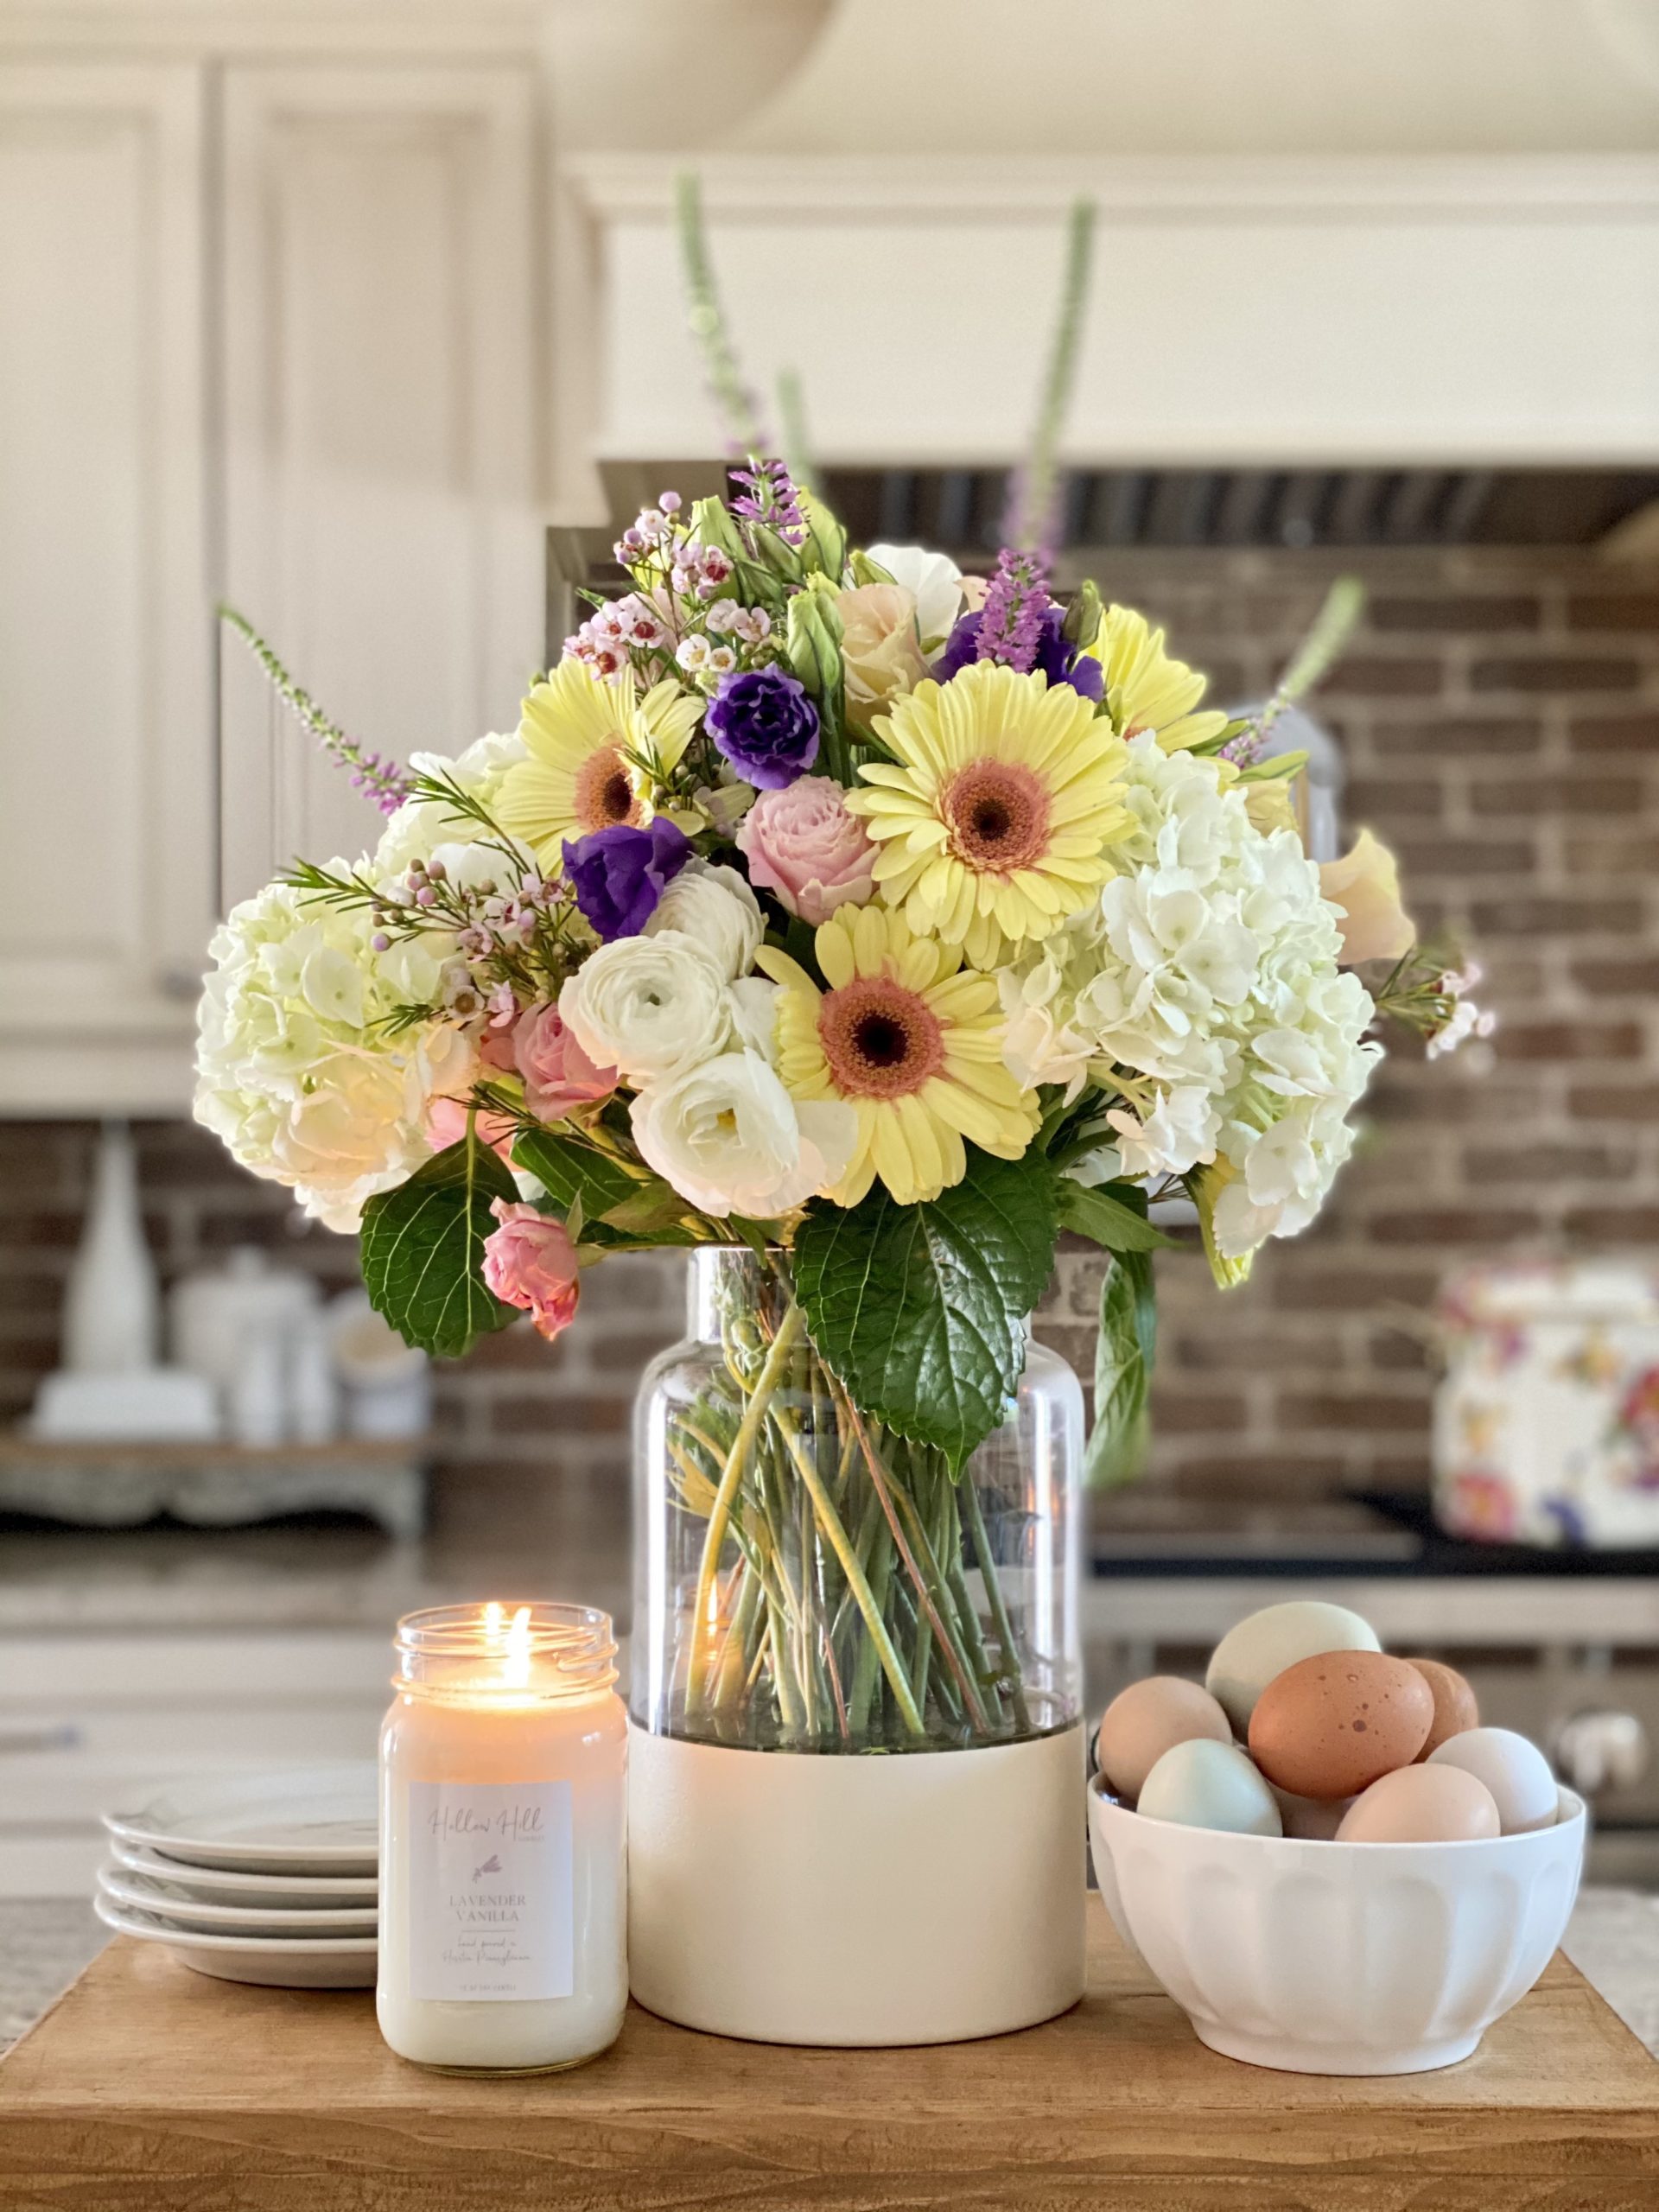 DIY color block vase in the kitchen on a wood riser with a beautiful spring bouquet, a candle, and a bowl of fresh eggs styled with it on the kitchen island.